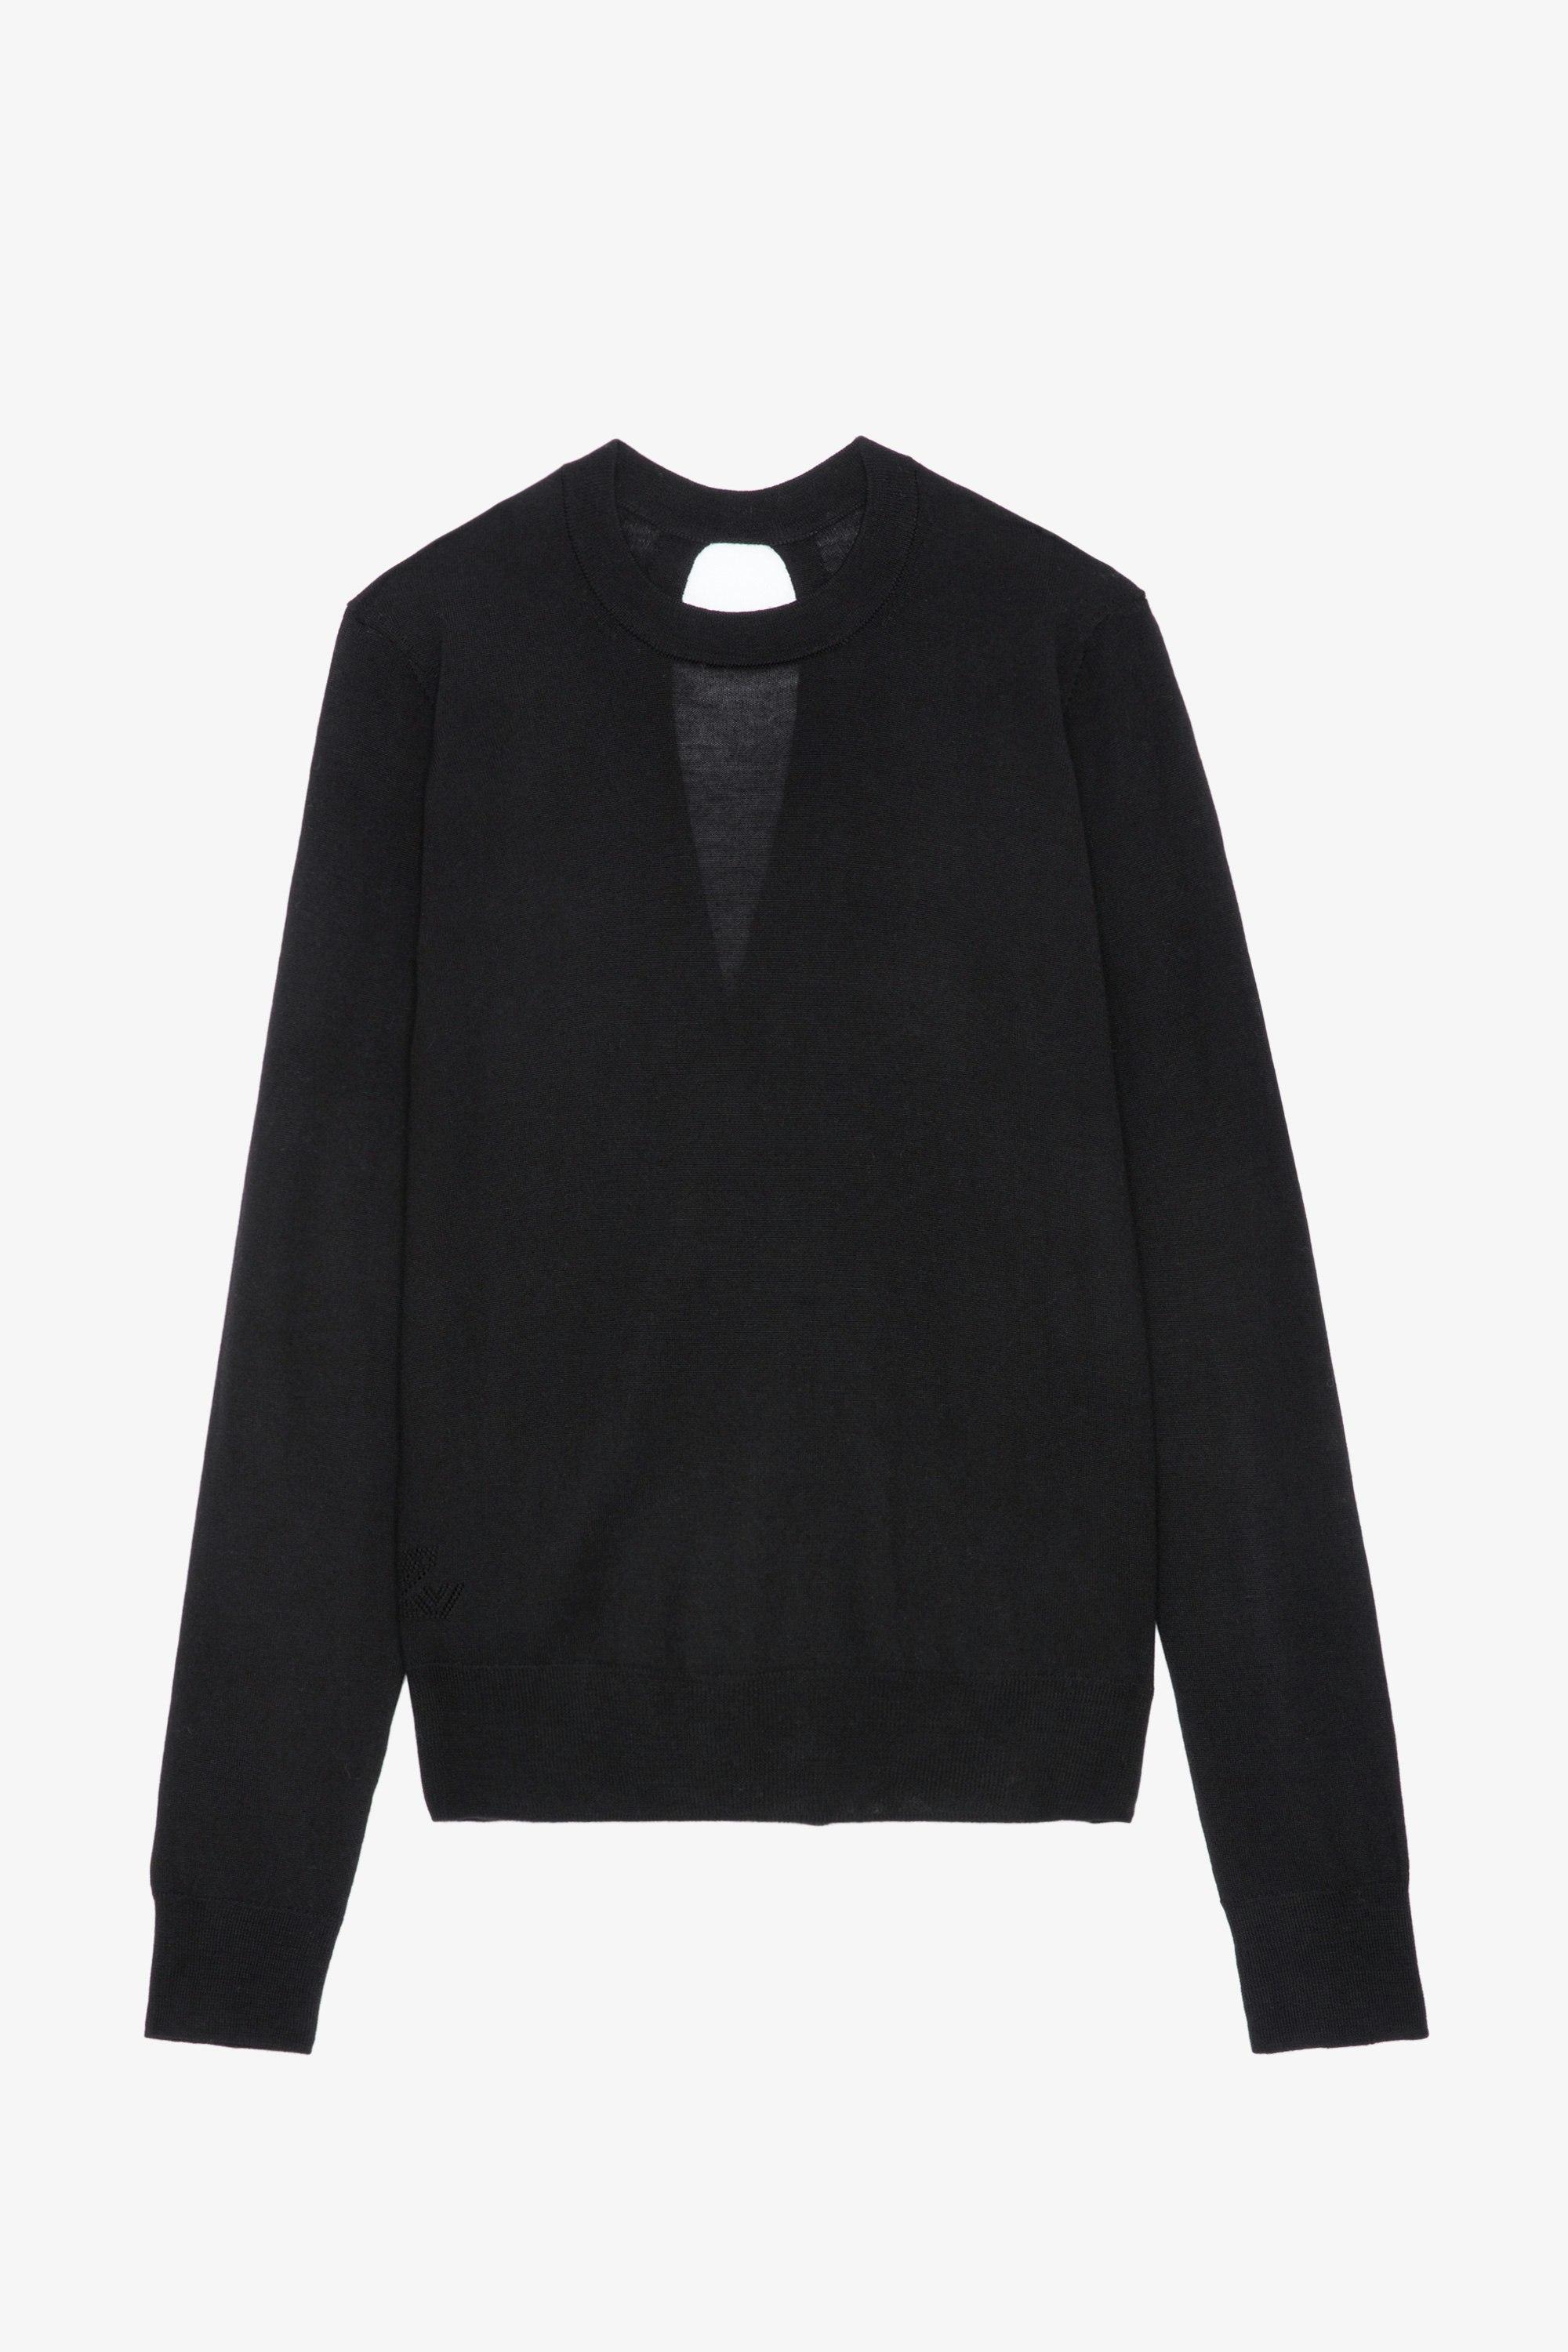 Emma Jumper - Black merino wool round-neck jumper with long sleeves and open crossover back.